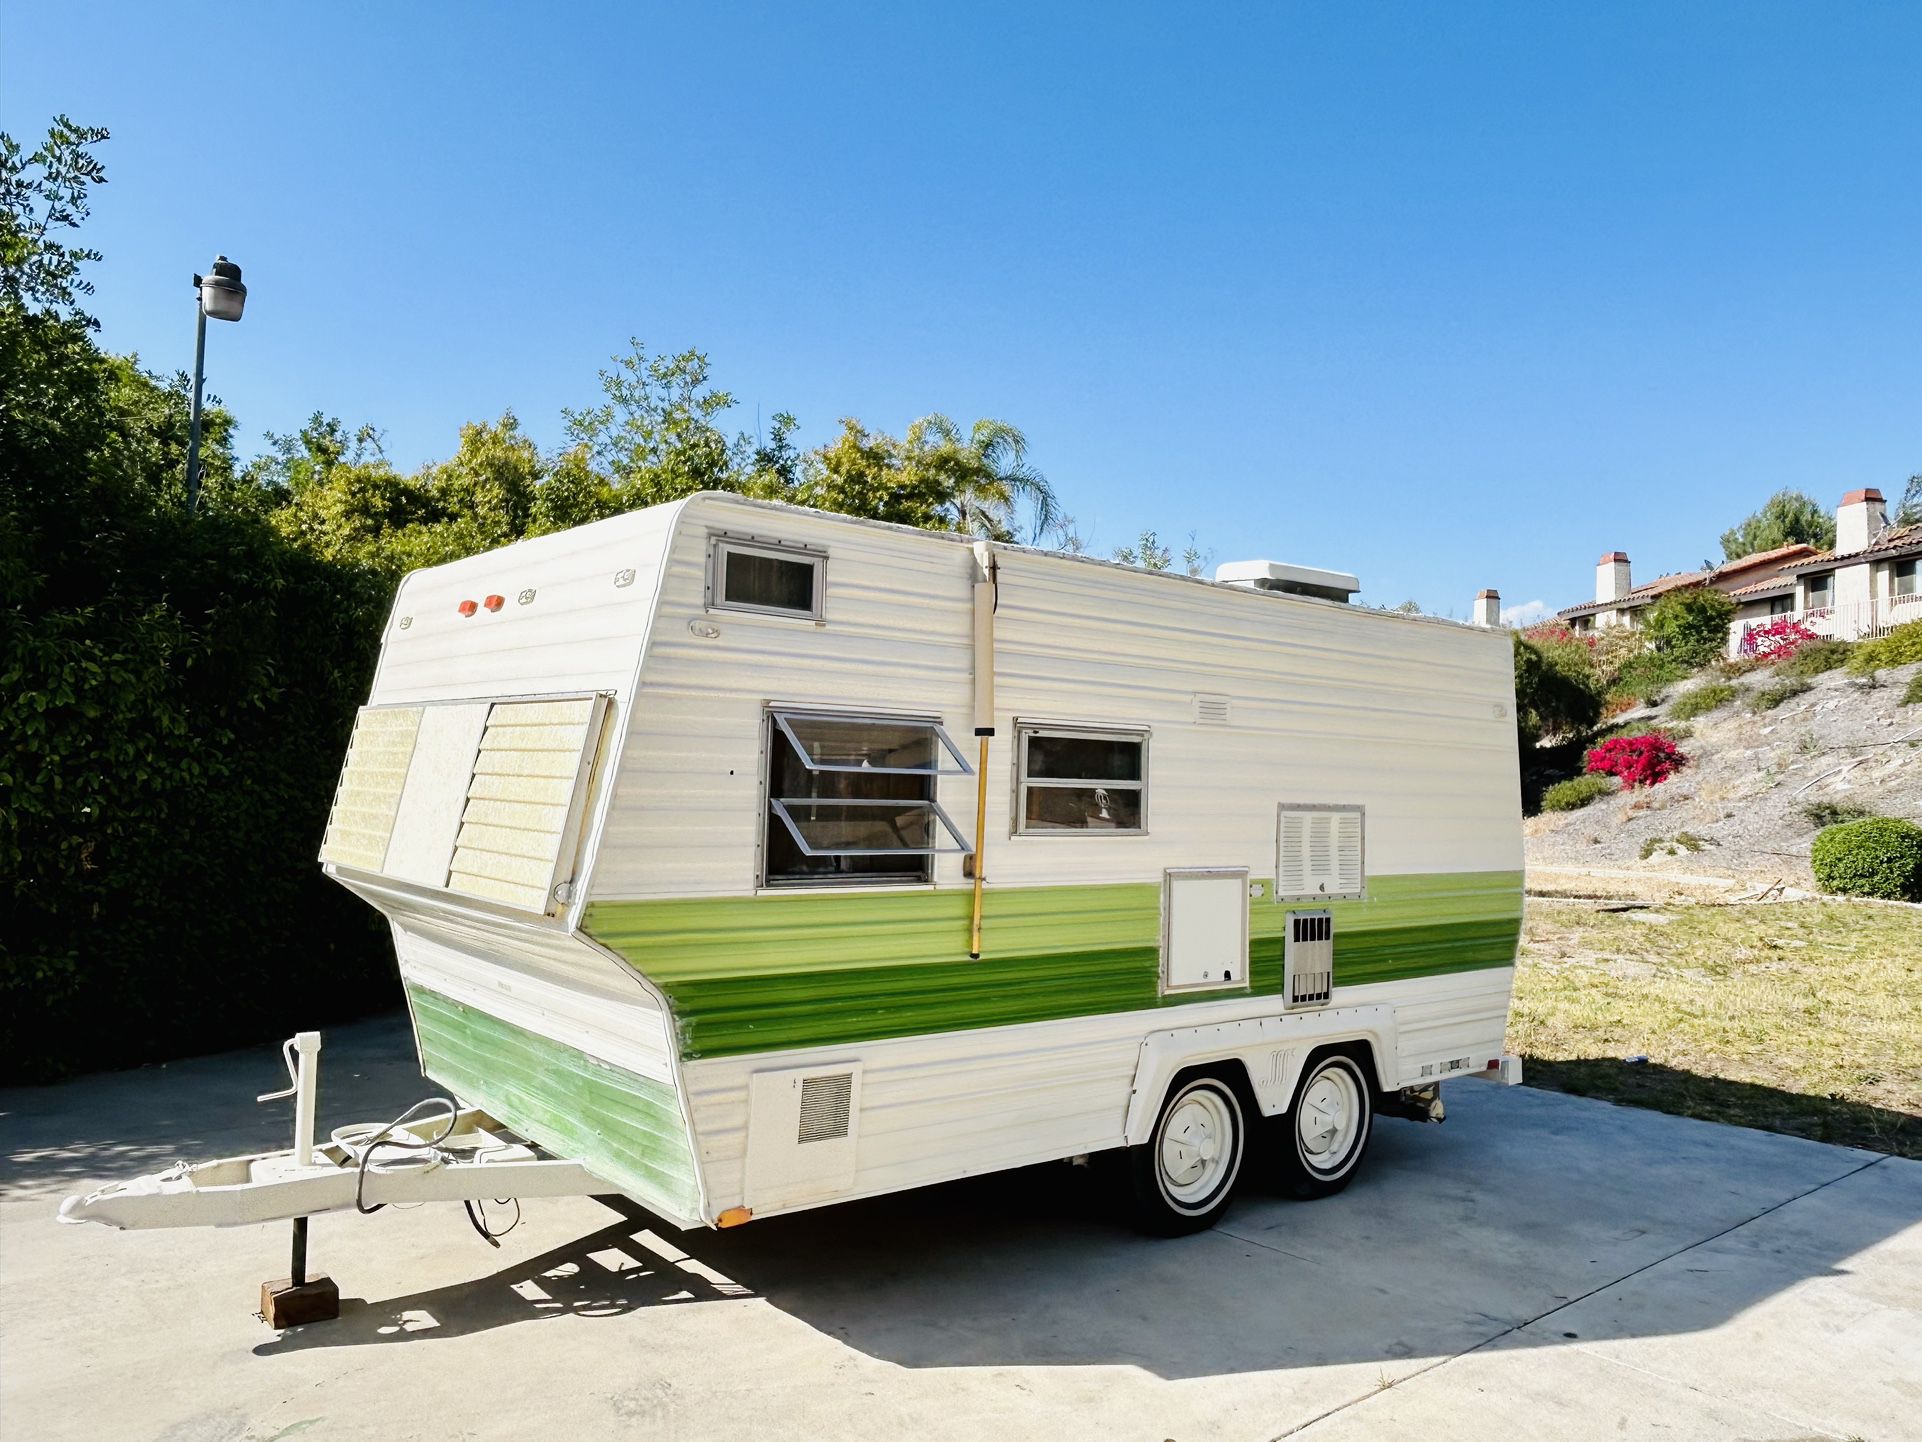 1975 Vintage Classic Nomad Travel Trailer… 18 Ft… Sleeps 4-5, Bunk-Bed !!  Fully Self Contained !! 